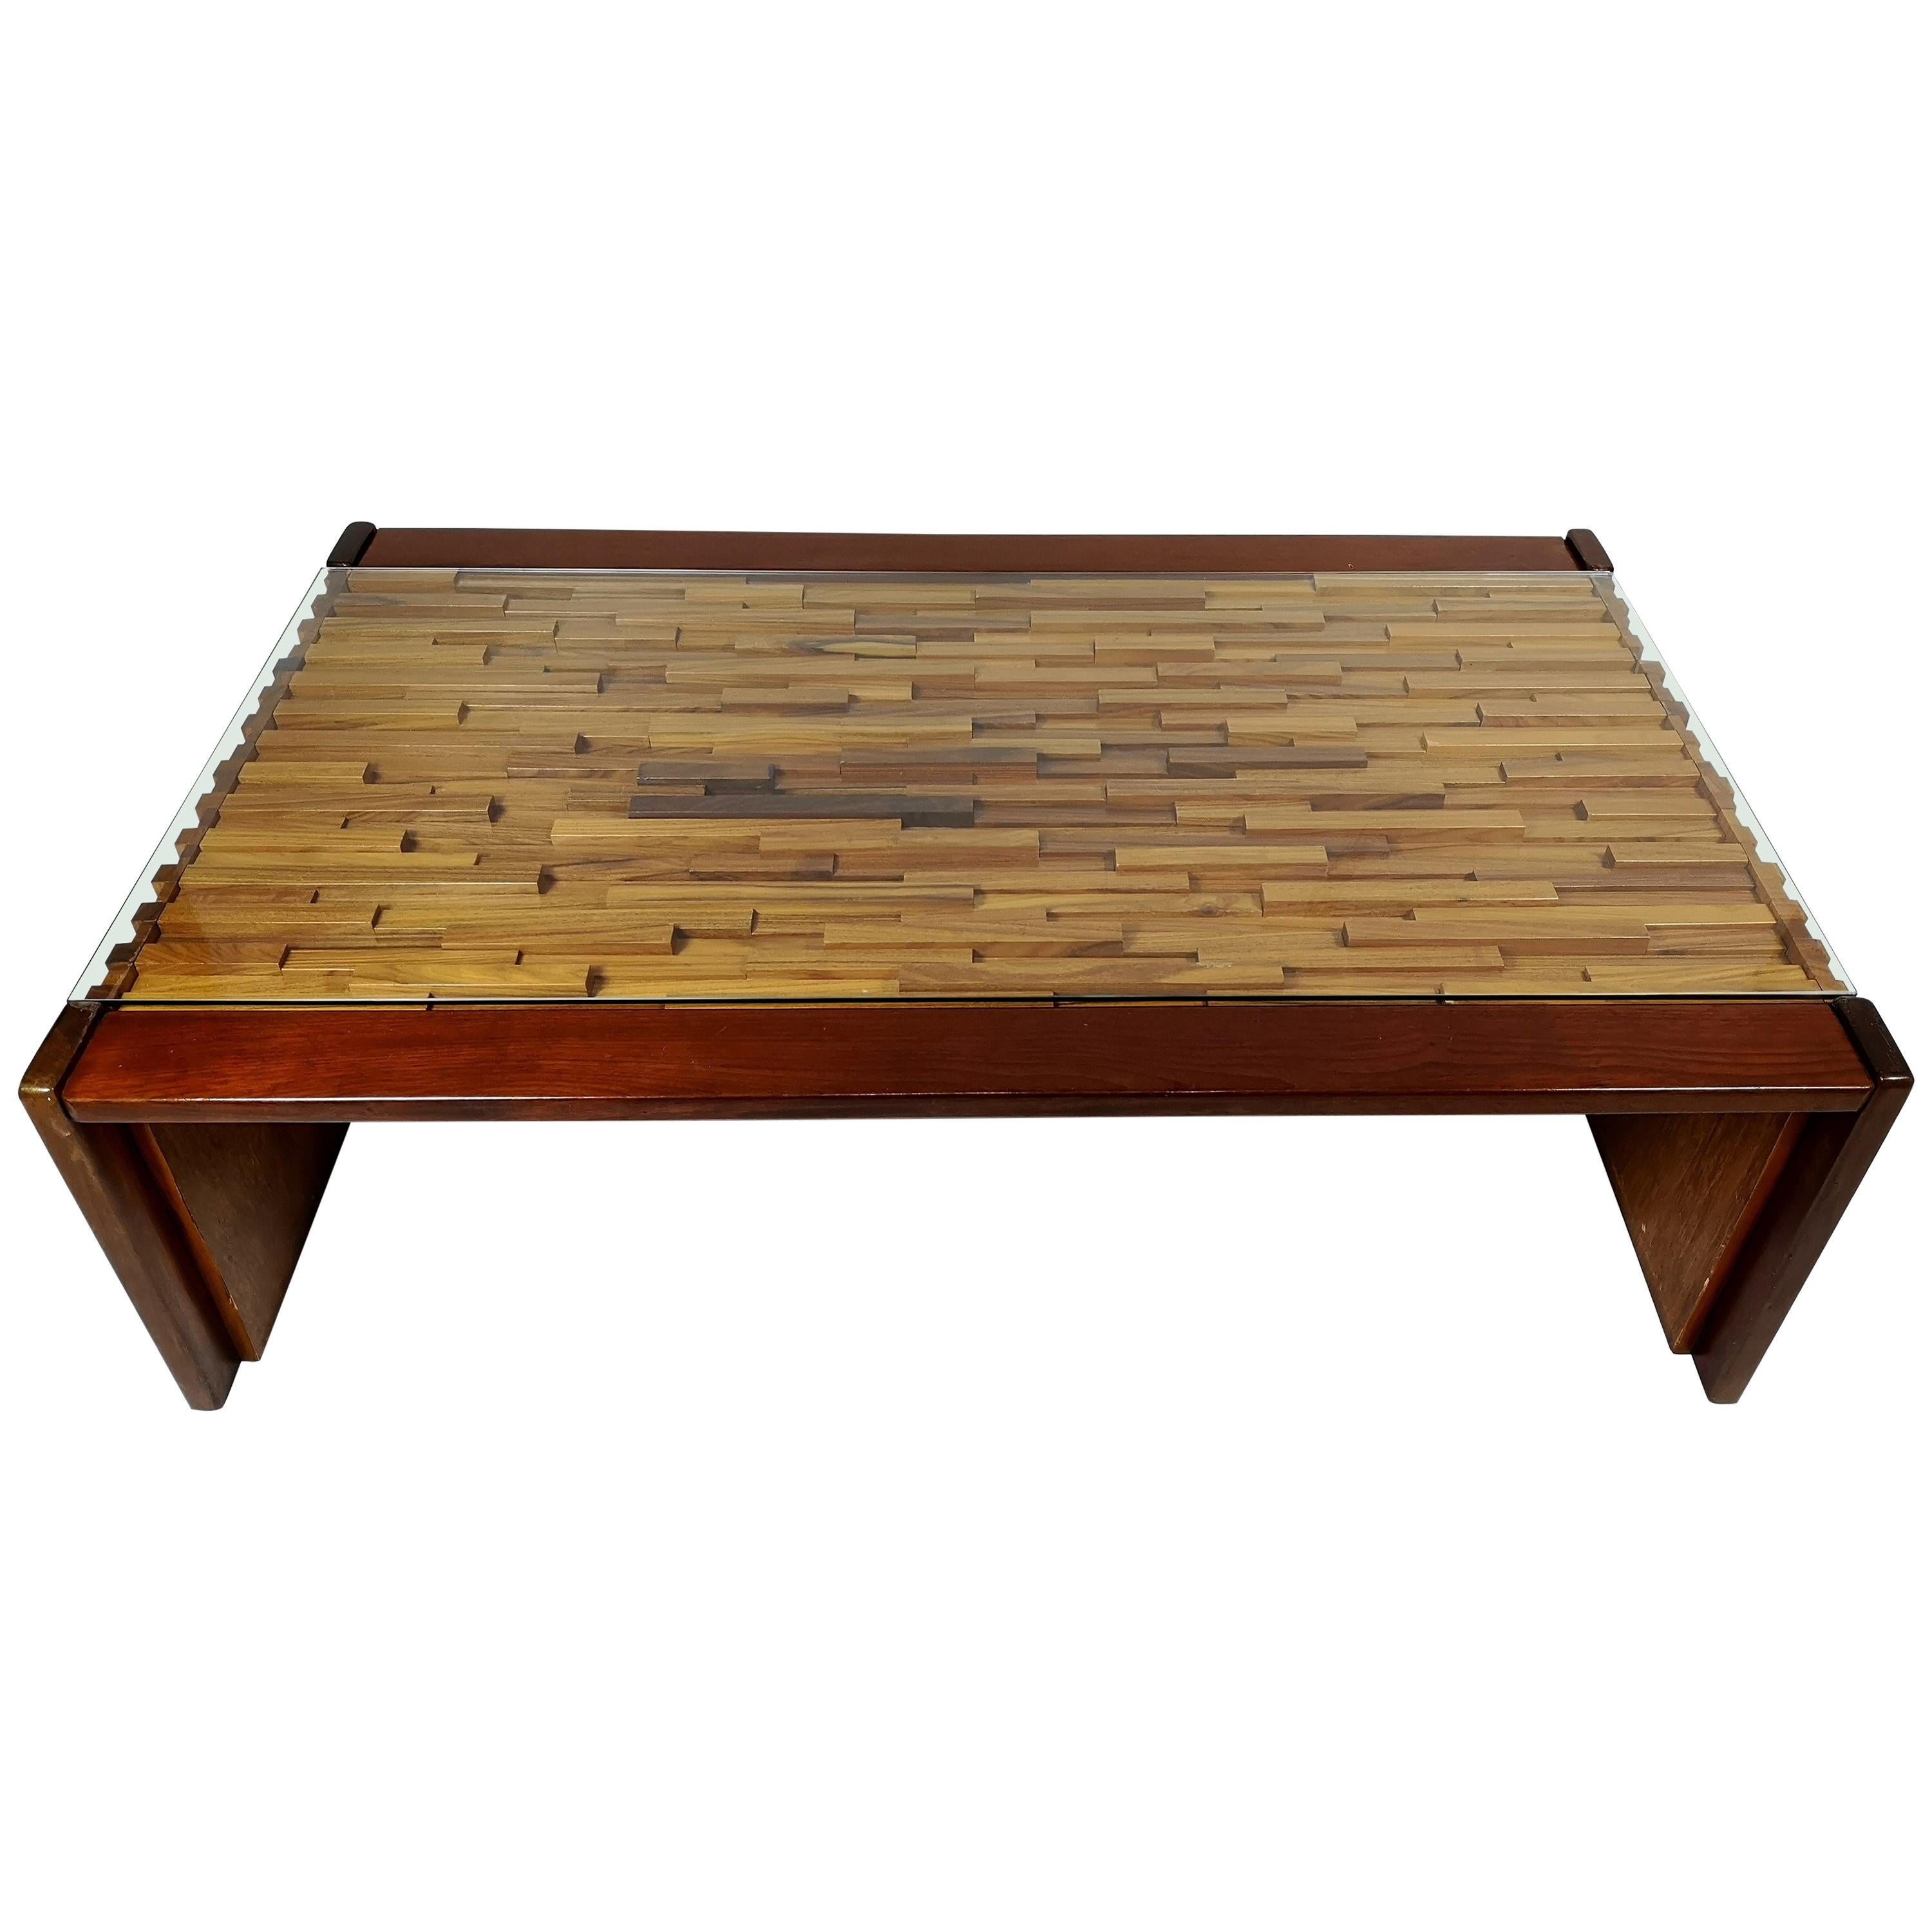 Large Jacaranda Coffee Table by Percival Lafer with Glass Top, 1960s For Sale